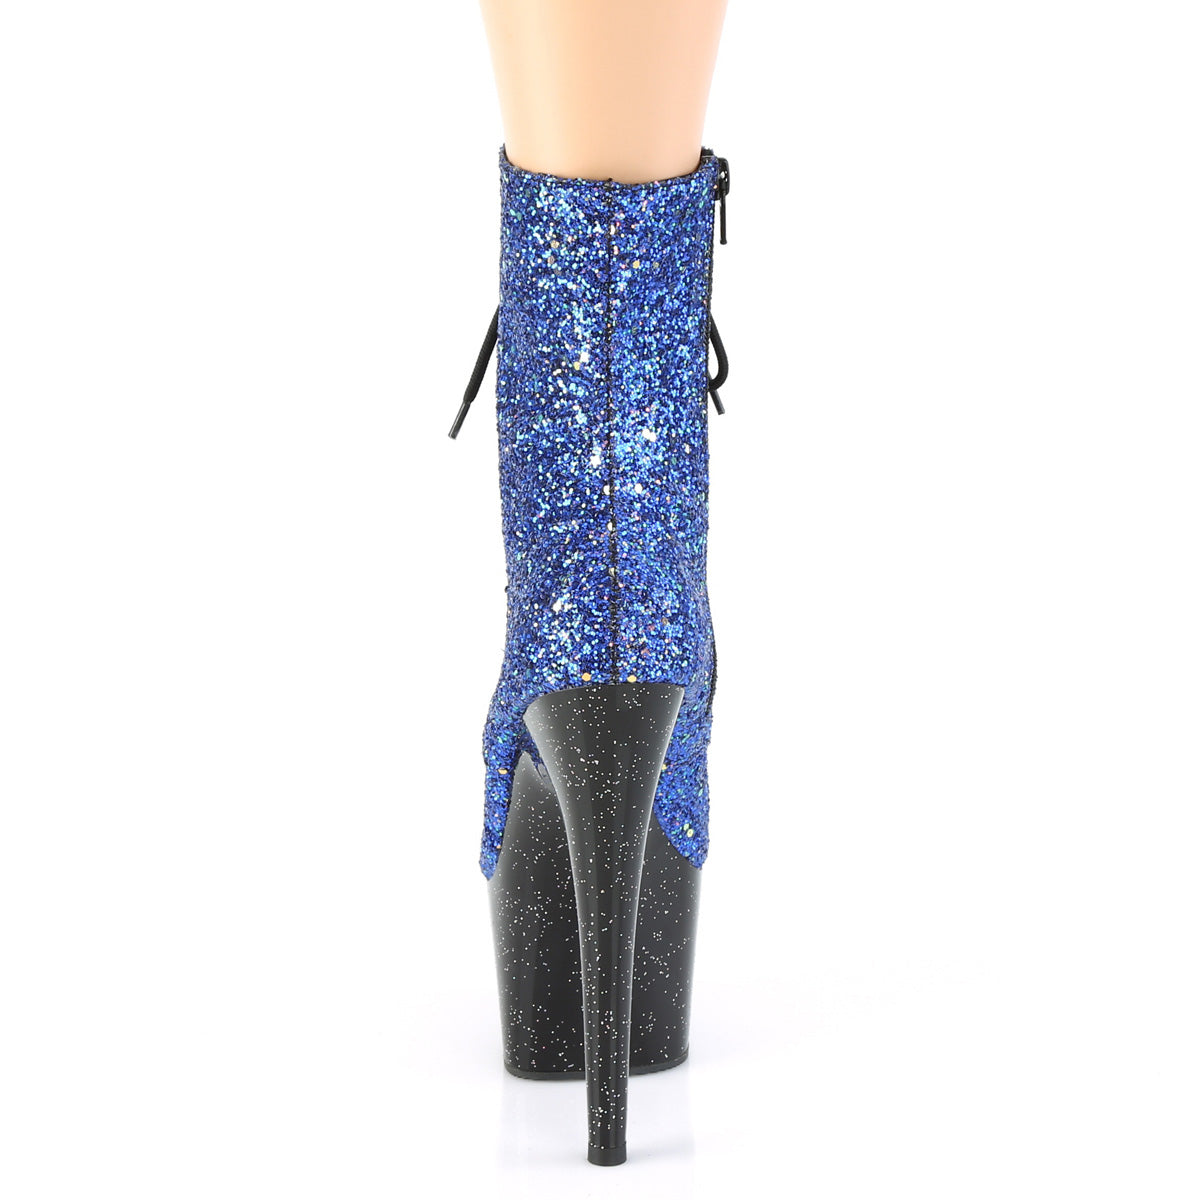 Pleaser Womens Ankle Boots ADORE-1020MG Blue Multi Glitter/Blk